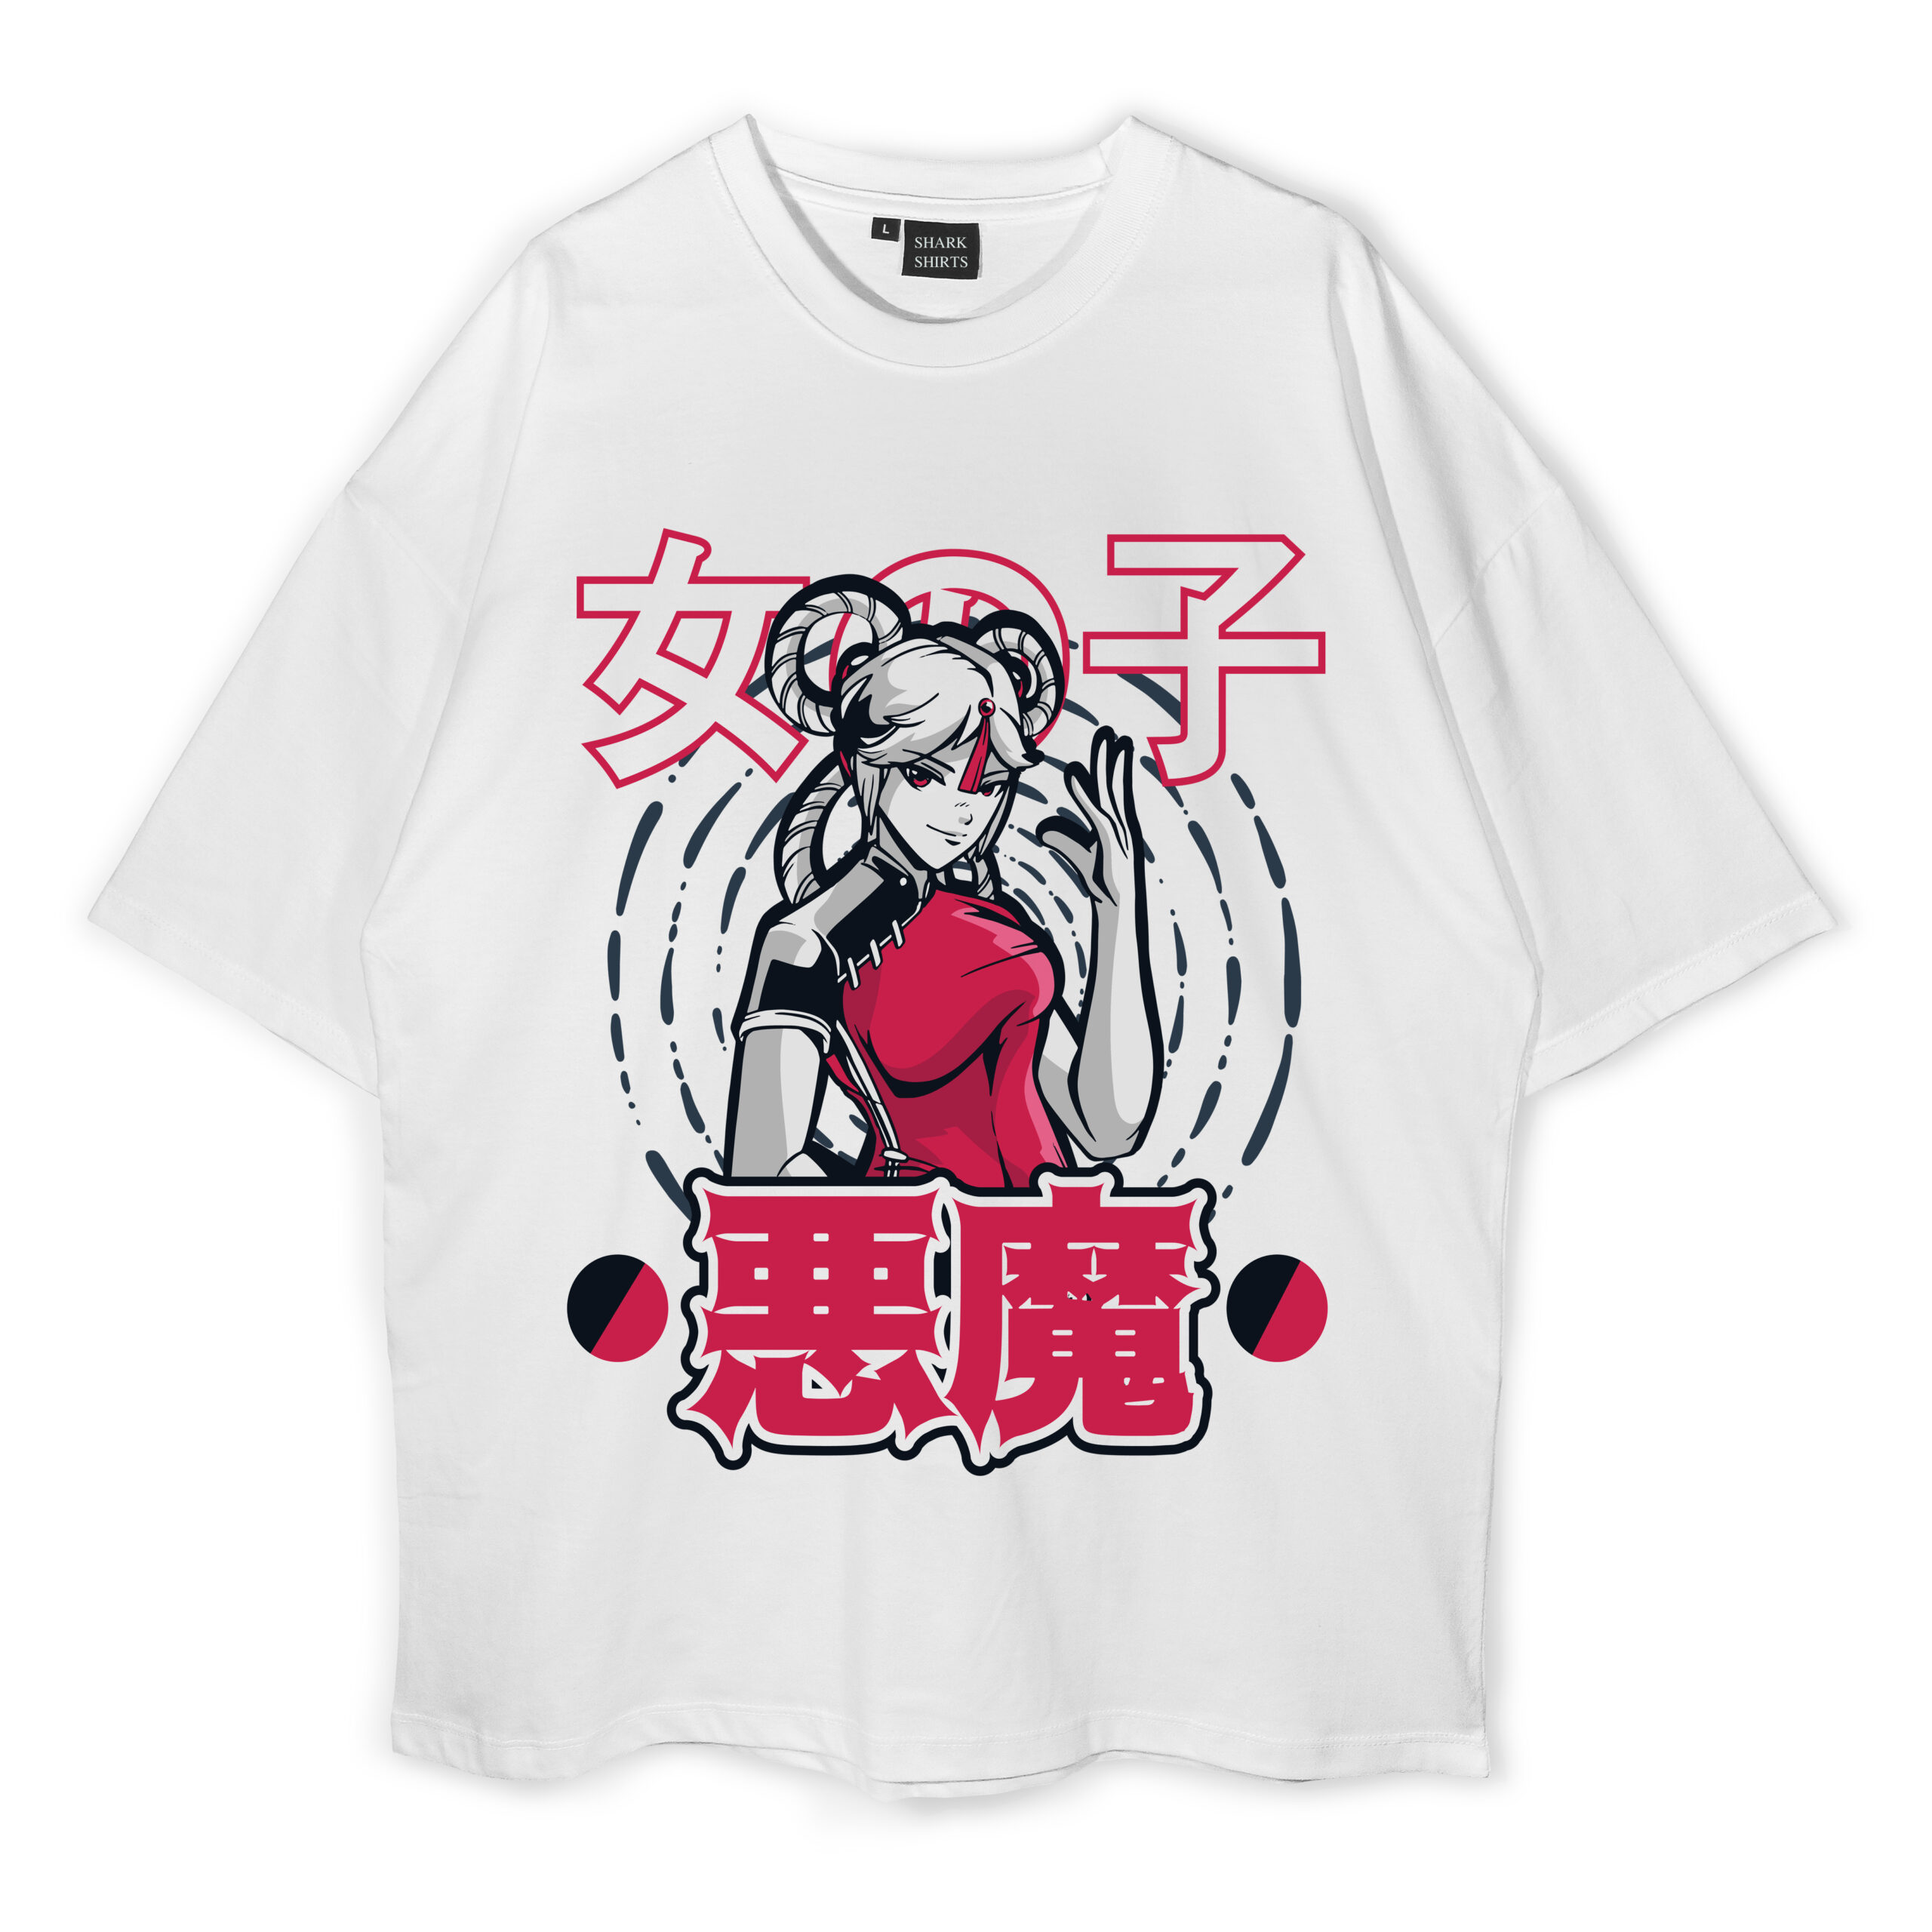 Japanese Oversize Anime Girl Tshirt in White  Usolo Outfitters